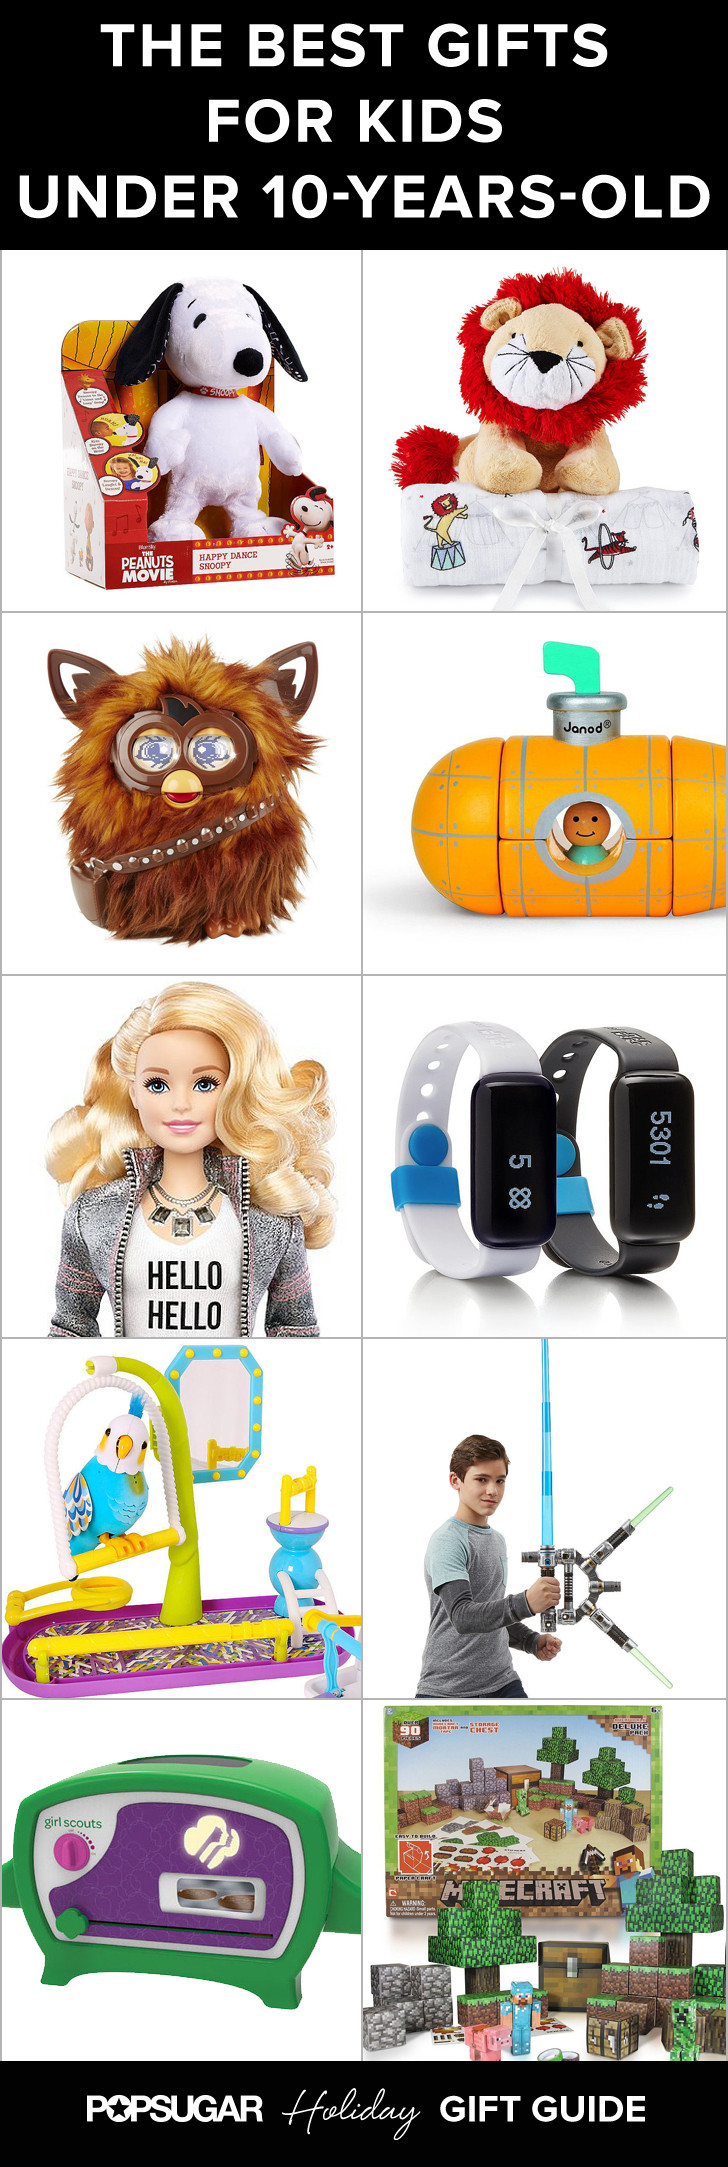 Gifts For Kids Under 10
 The Best Gifts For Kids Under 10 Years Old in 2019